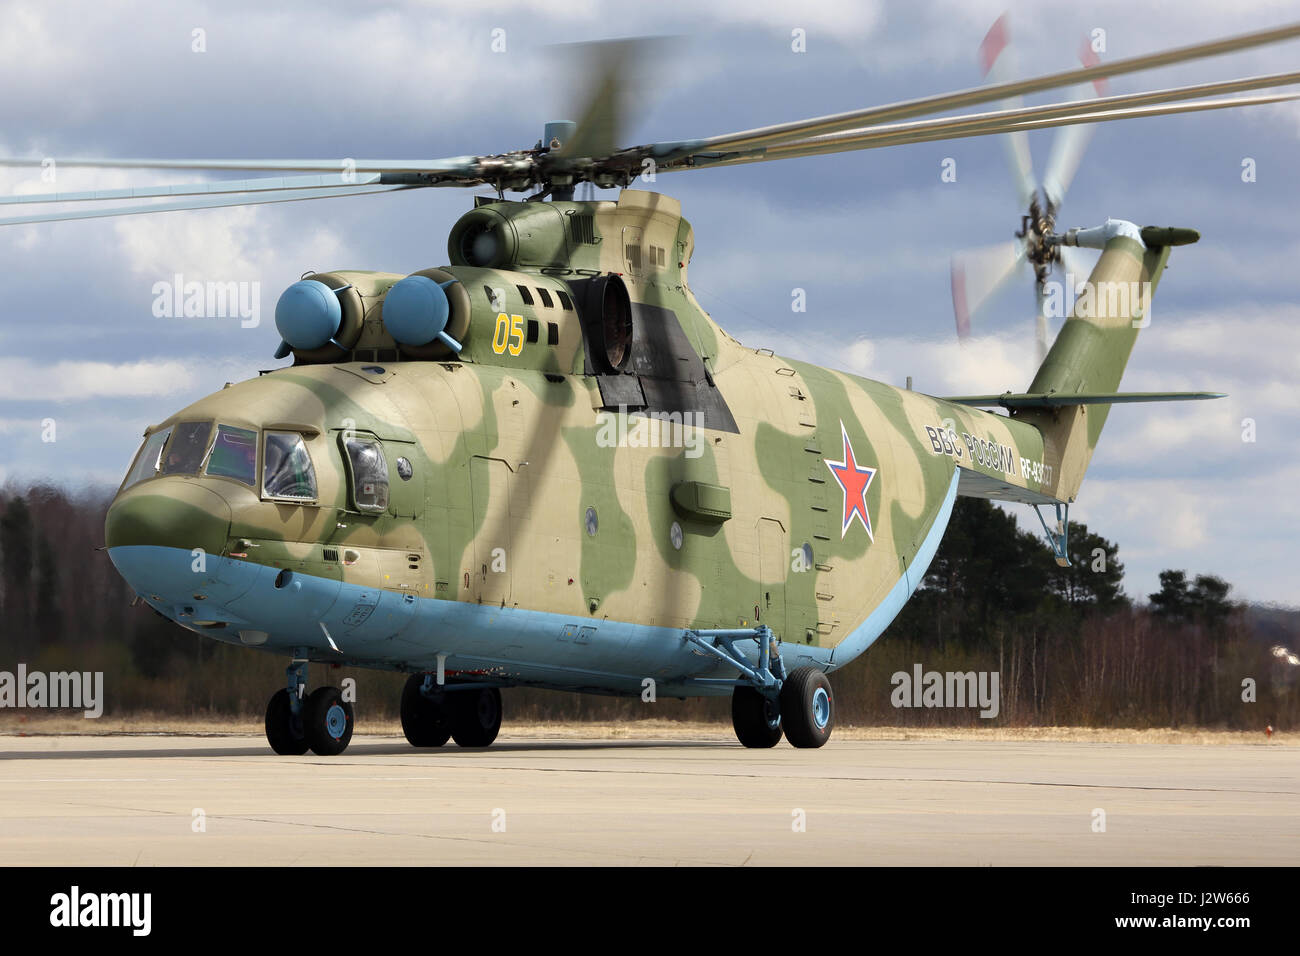 KUBINKA, MOSCOW REGION, RUSSIA - APRIL 24, 2017: Mil Mi-26 RF-93572 heavy transport helicopter of Russian air force during Victory Day parade rehearsa Stock Photo